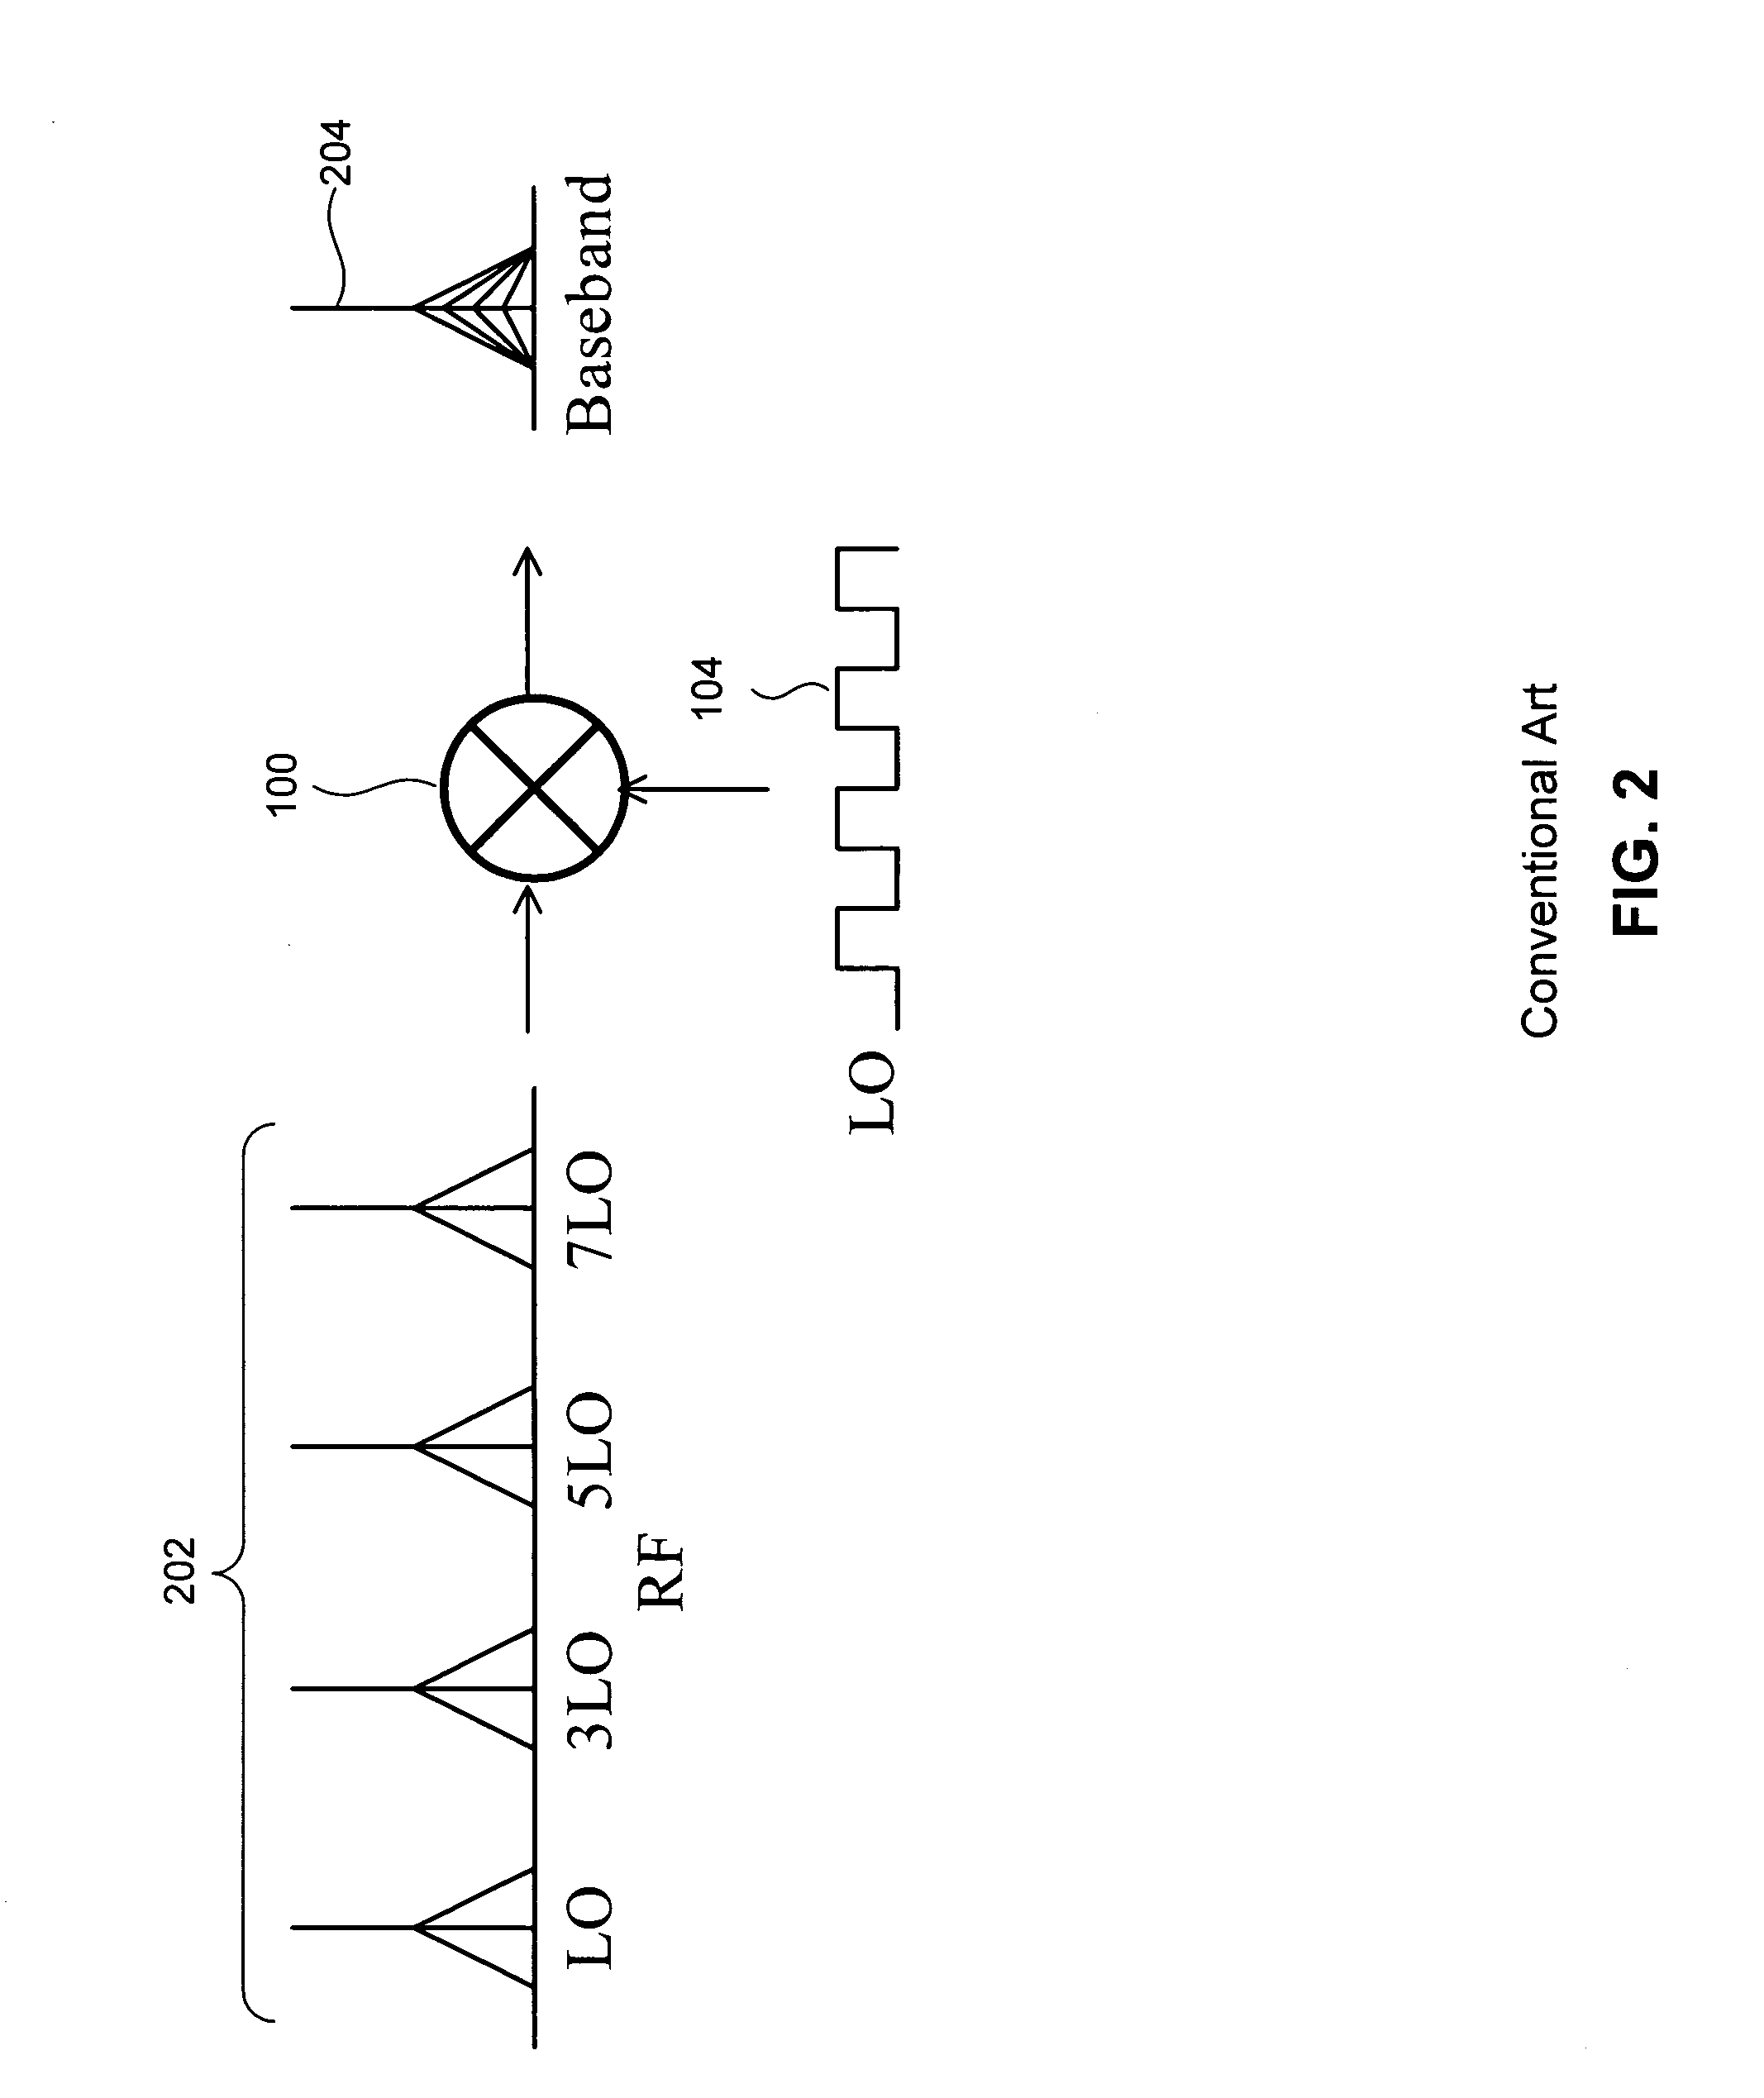 High-order harmonic rejection mixer using multiple LO phases